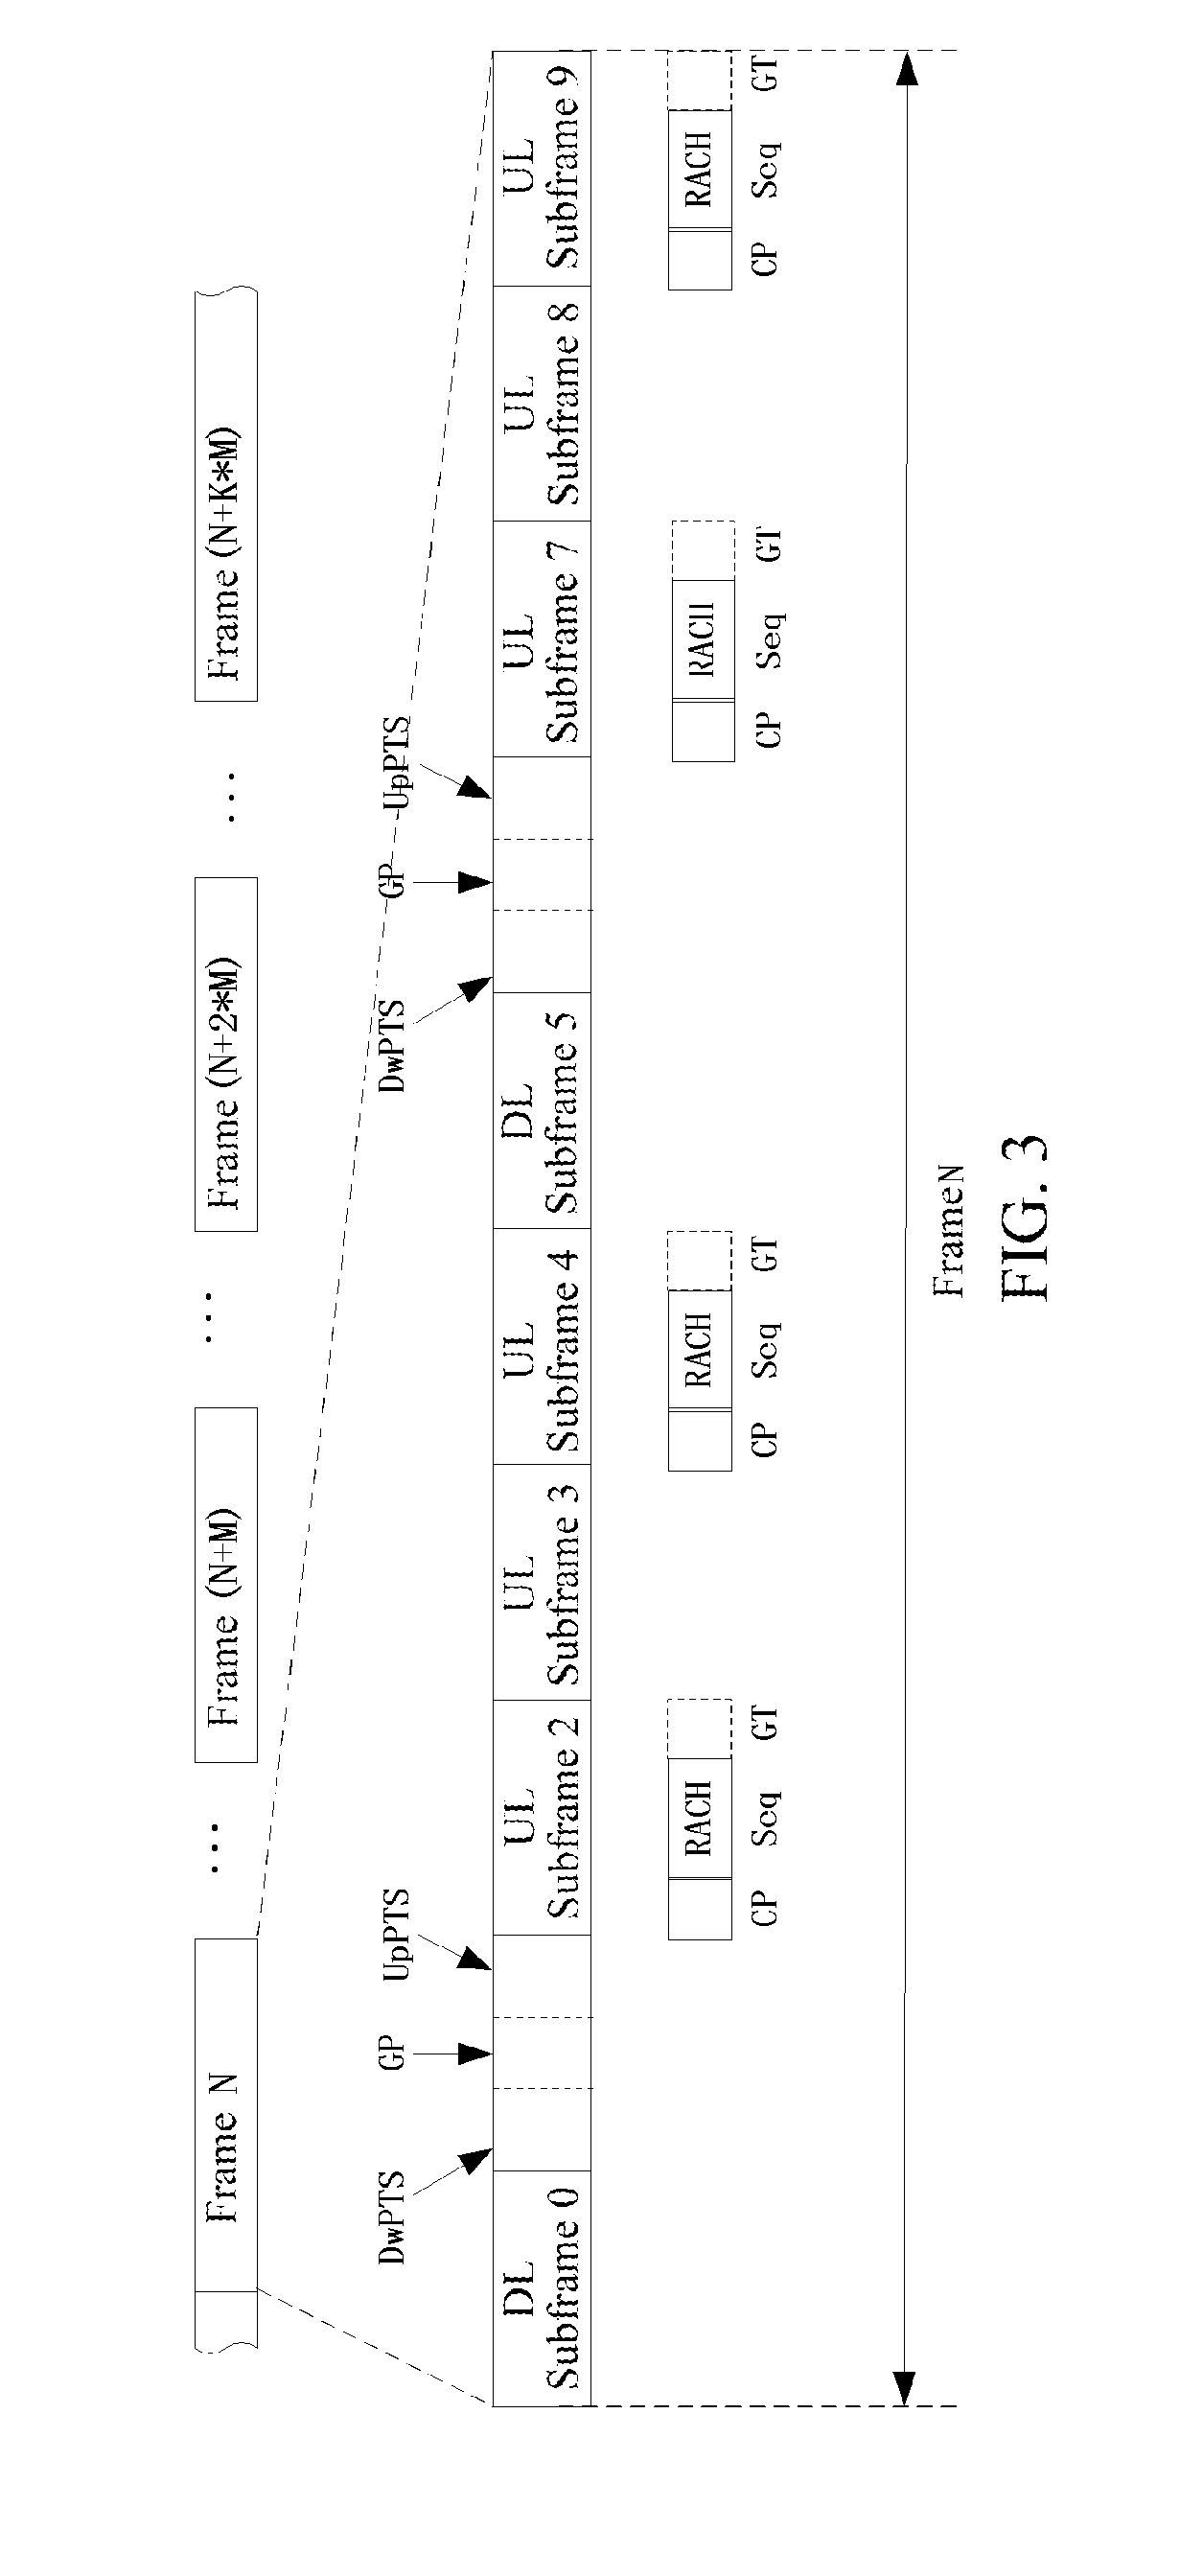 Method for transmitting enhanced random access sequence and machine type communication terminal